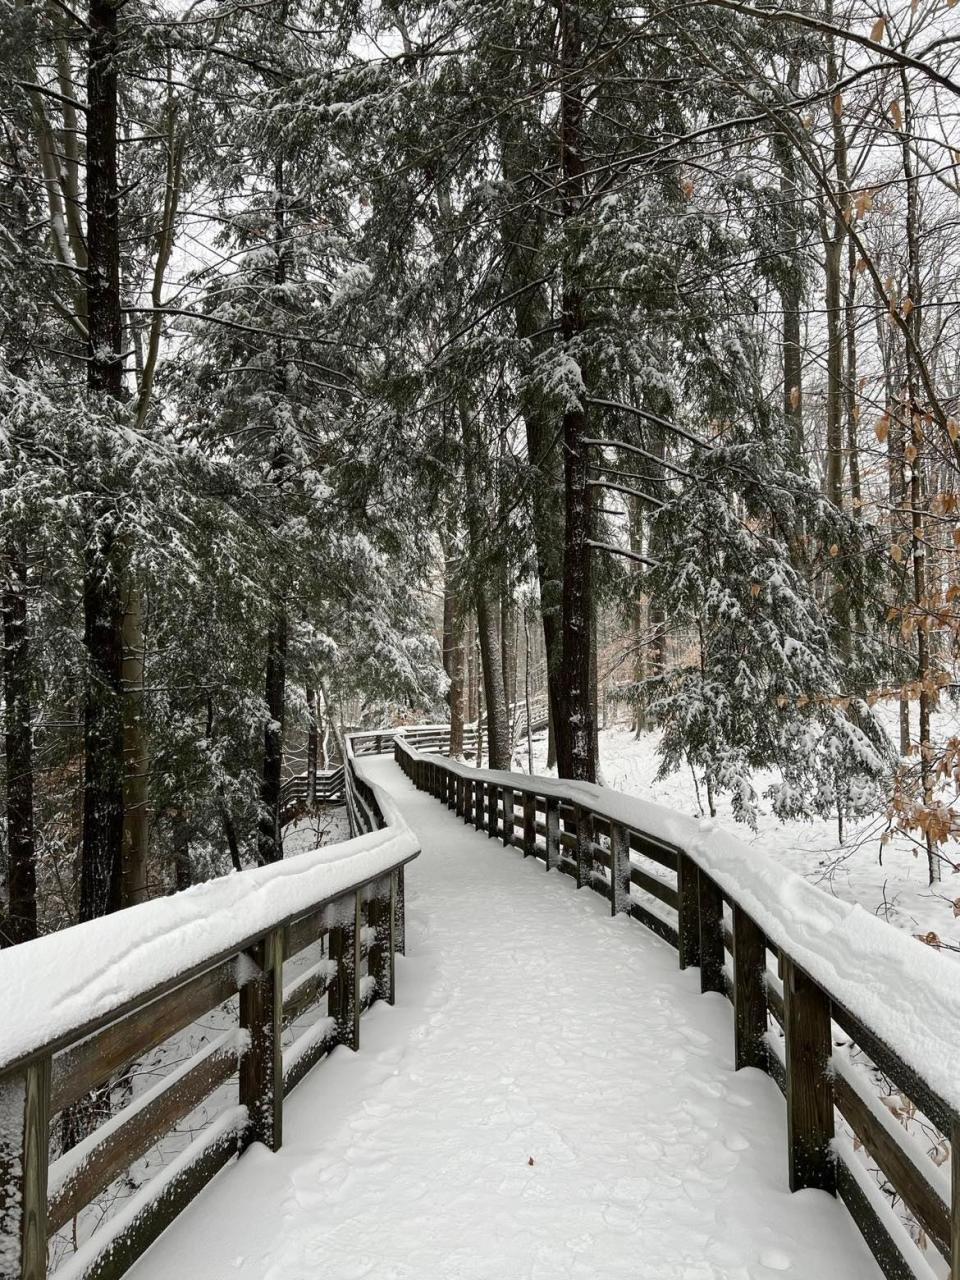 Snow adds to the scenery for winter hikes on trails like this one at Brandywine Gorge at Cuyahoga Valley National Park.